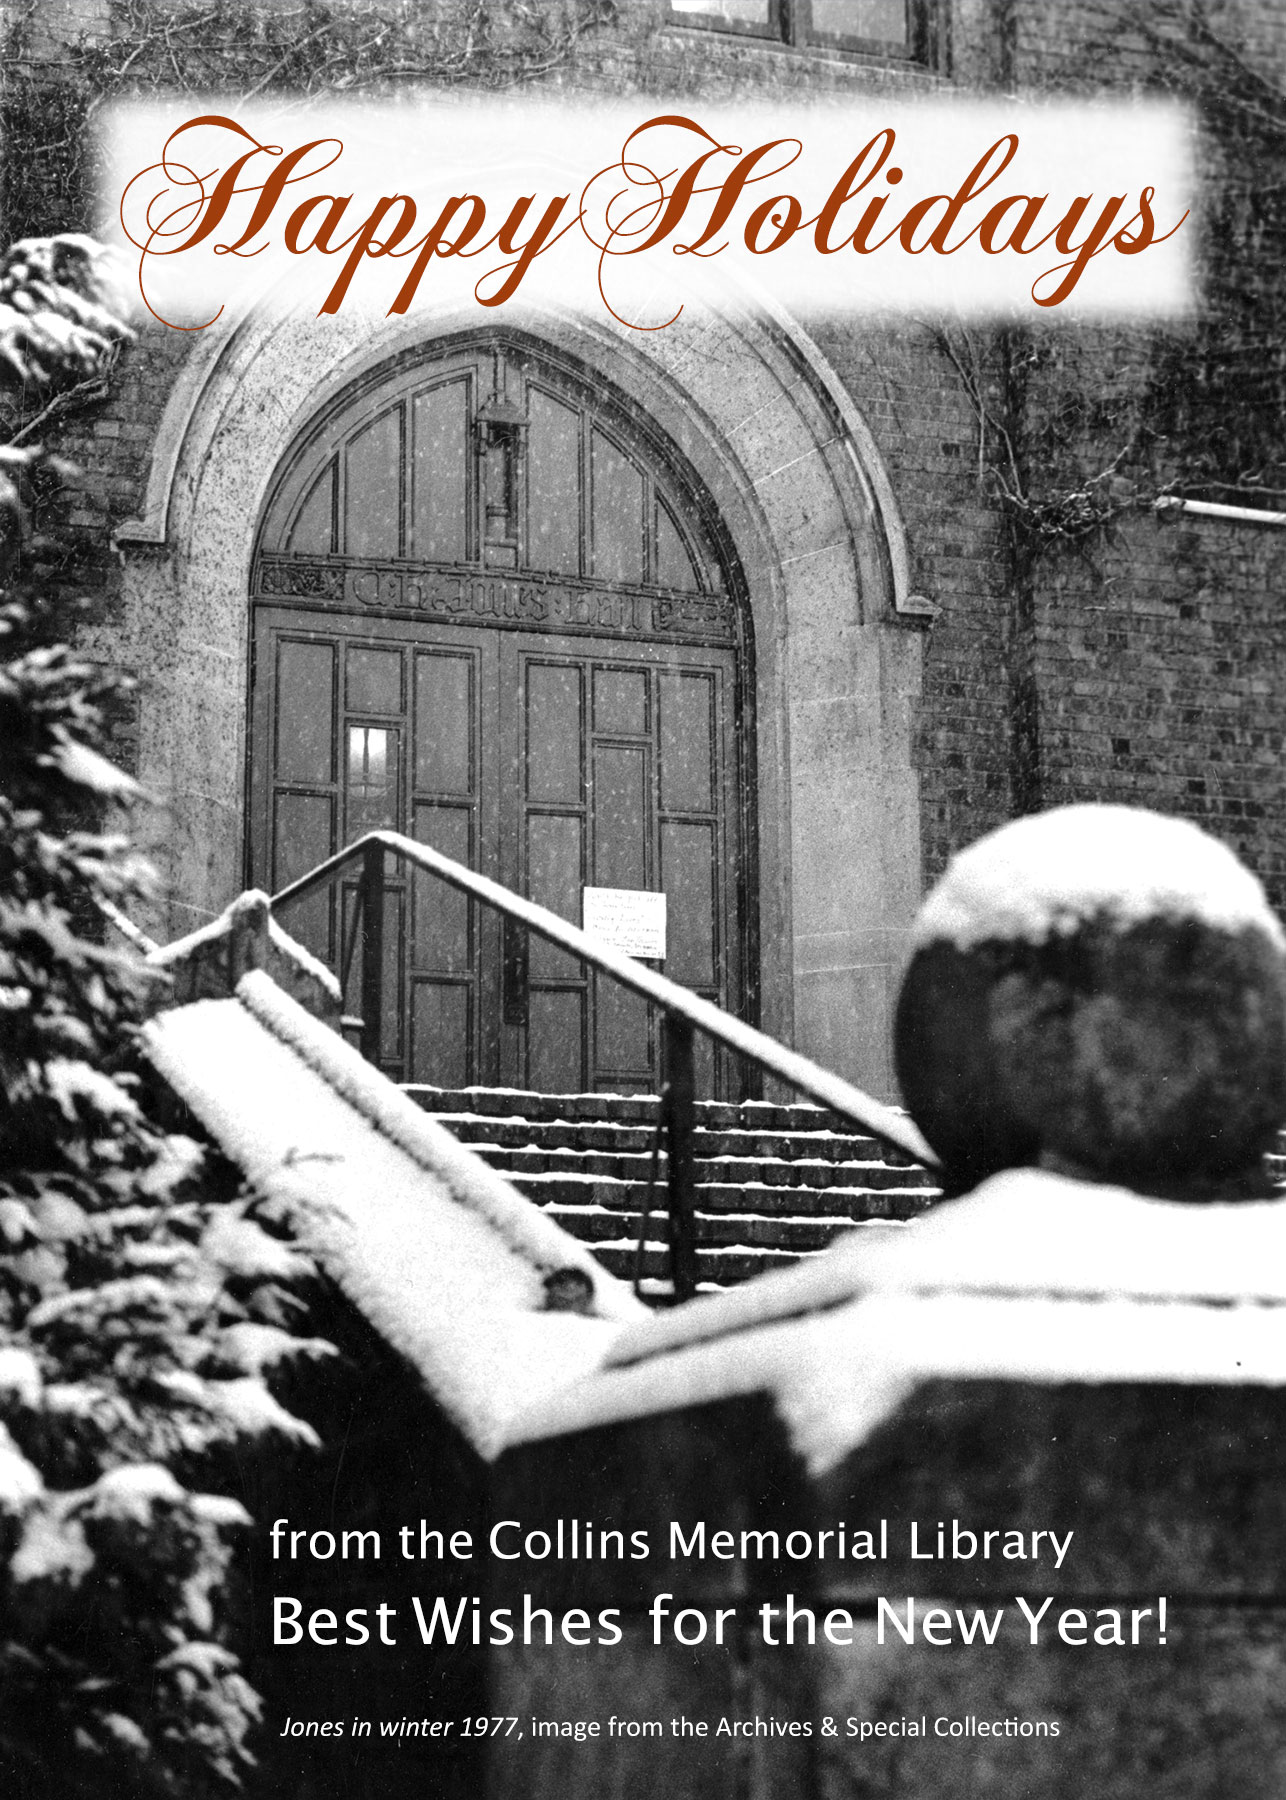 Jones in winter 1977, image from the Archives & Special Collections